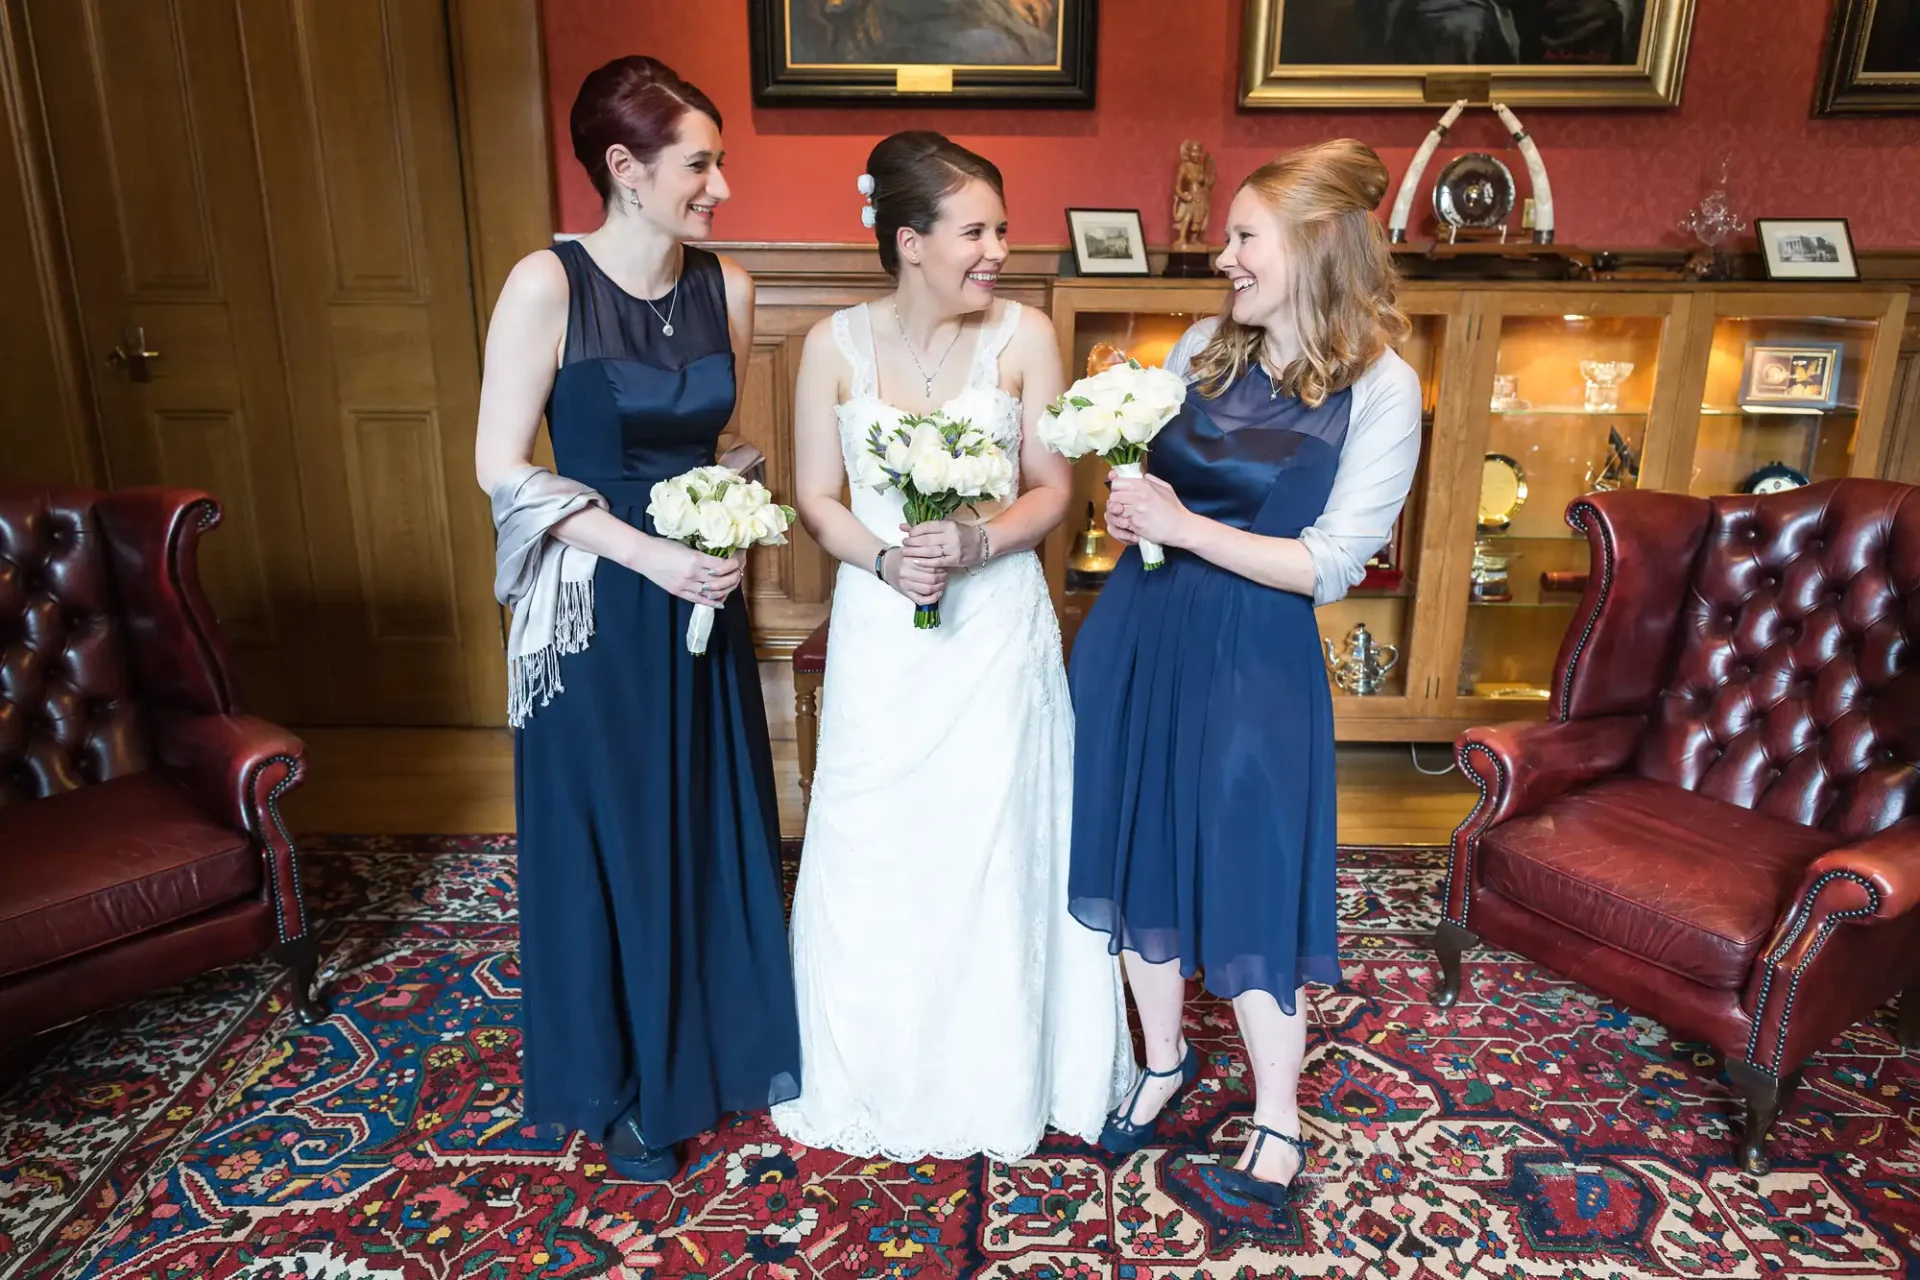 Three women in formal attire, two in navy dresses and one in a white wedding dress, holding bouquets and smiling in an elegant room with red chairs and a patterned rug.